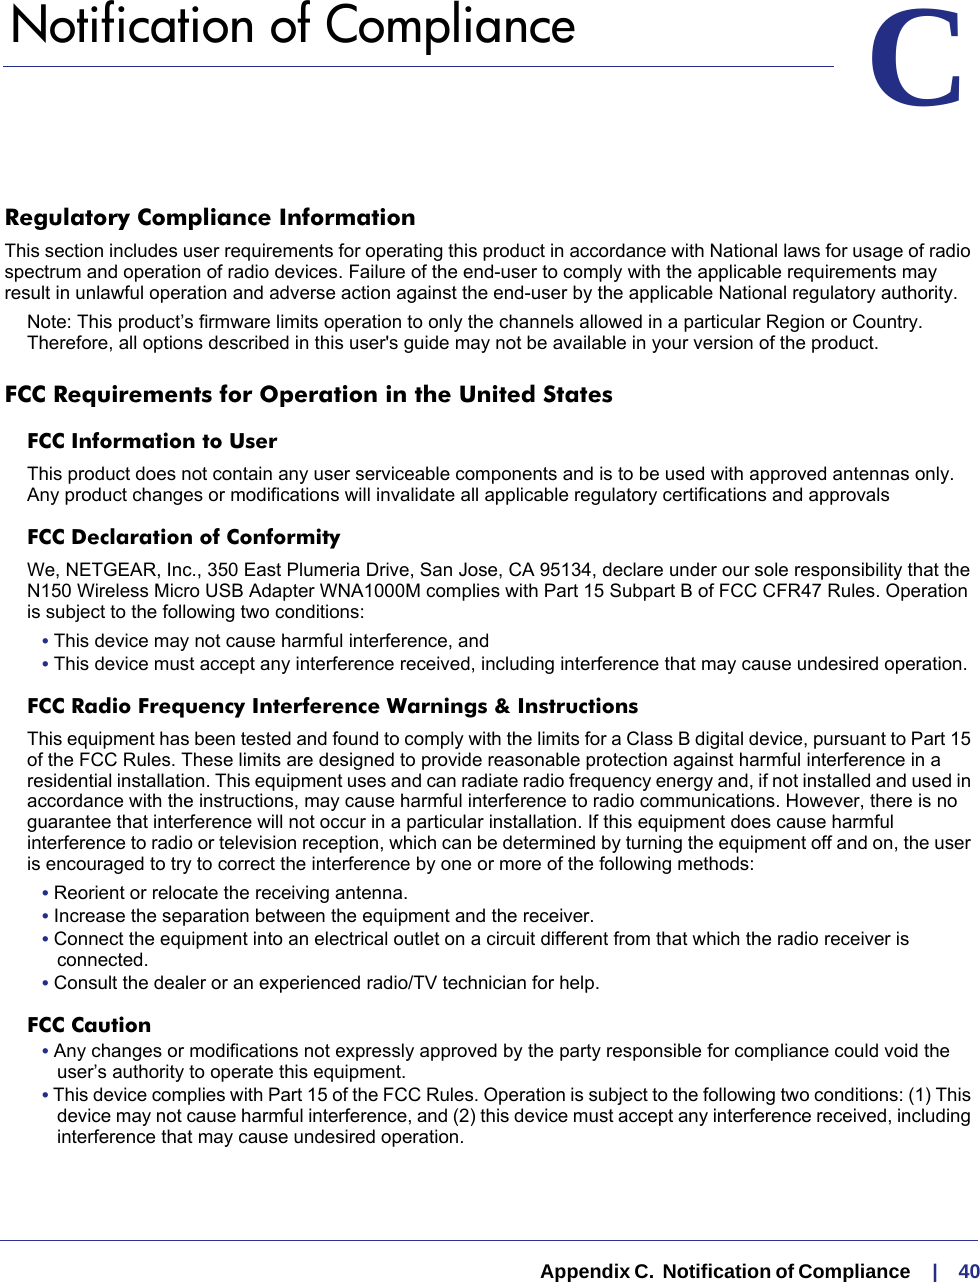   Appendix C.  Notification of Compliance     |    40CC.   Notification of ComplianceRegulatory Compliance InformationThis section includes user requirements for operating this product in accordance with National laws for usage of radio spectrum and operation of radio devices. Failure of the end-user to comply with the applicable requirements may result in unlawful operation and adverse action against the end-user by the applicable National regulatory authority.Note: This product’s firmware limits operation to only the channels allowed in a particular Region or Country. Therefore, all options described in this user&apos;s guide may not be available in your version of the product.FCC Requirements for Operation in the United States FCC Information to UserThis product does not contain any user serviceable components and is to be used with approved antennas only. Any product changes or modifications will invalidate all applicable regulatory certifications and approvalsFCC Declaration of ConformityWe, NETGEAR, Inc., 350 East Plumeria Drive, San Jose, CA 95134, declare under our sole responsibility that the N150 Wireless Micro USB Adapter WNA1000M complies with Part 15 Subpart B of FCC CFR47 Rules. Operation is subject to the following two conditions:• This device may not cause harmful interference, and• This device must accept any interference received, including interference that may cause undesired operation.FCC Radio Frequency Interference Warnings &amp; InstructionsThis equipment has been tested and found to comply with the limits for a Class B digital device, pursuant to Part 15 of the FCC Rules. These limits are designed to provide reasonable protection against harmful interference in a residential installation. This equipment uses and can radiate radio frequency energy and, if not installed and used in accordance with the instructions, may cause harmful interference to radio communications. However, there is no guarantee that interference will not occur in a particular installation. If this equipment does cause harmful interference to radio or television reception, which can be determined by turning the equipment off and on, the user is encouraged to try to correct the interference by one or more of the following methods:• Reorient or relocate the receiving antenna.• Increase the separation between the equipment and the receiver.• Connect the equipment into an electrical outlet on a circuit different from that which the radio receiver is connected.• Consult the dealer or an experienced radio/TV technician for help.FCC Caution• Any changes or modifications not expressly approved by the party responsible for compliance could void the user’s authority to operate this equipment. • This device complies with Part 15 of the FCC Rules. Operation is subject to the following two conditions: (1) This device may not cause harmful interference, and (2) this device must accept any interference received, including interference that may cause undesired operation. 